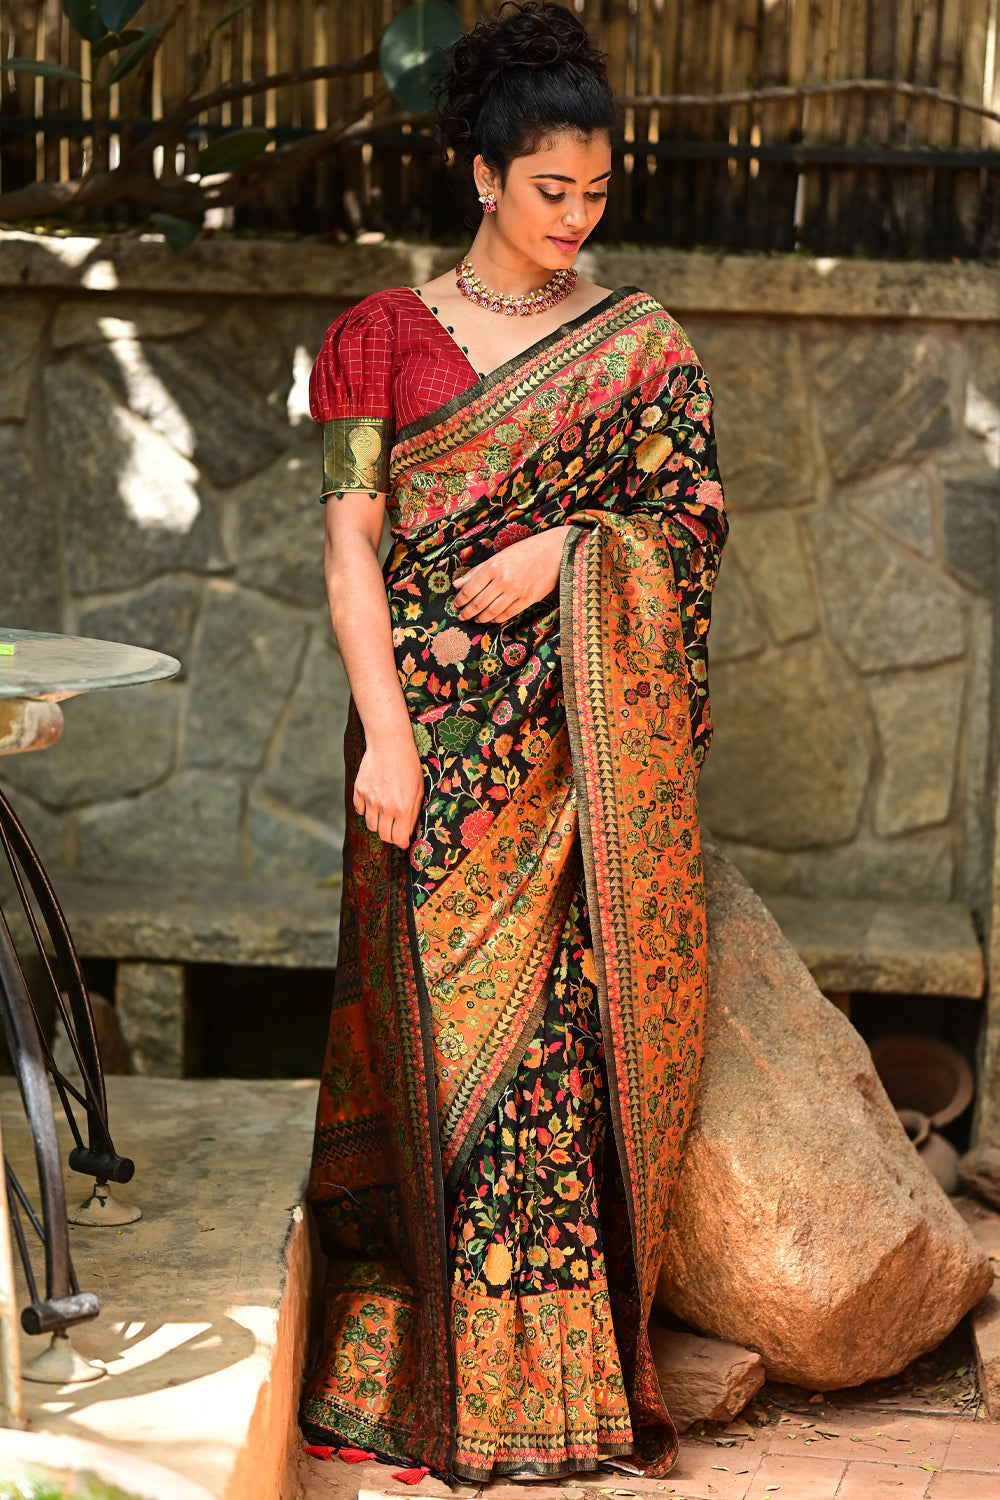 Kani Design with Floral Jaal in Black and Orange Rayon Saree